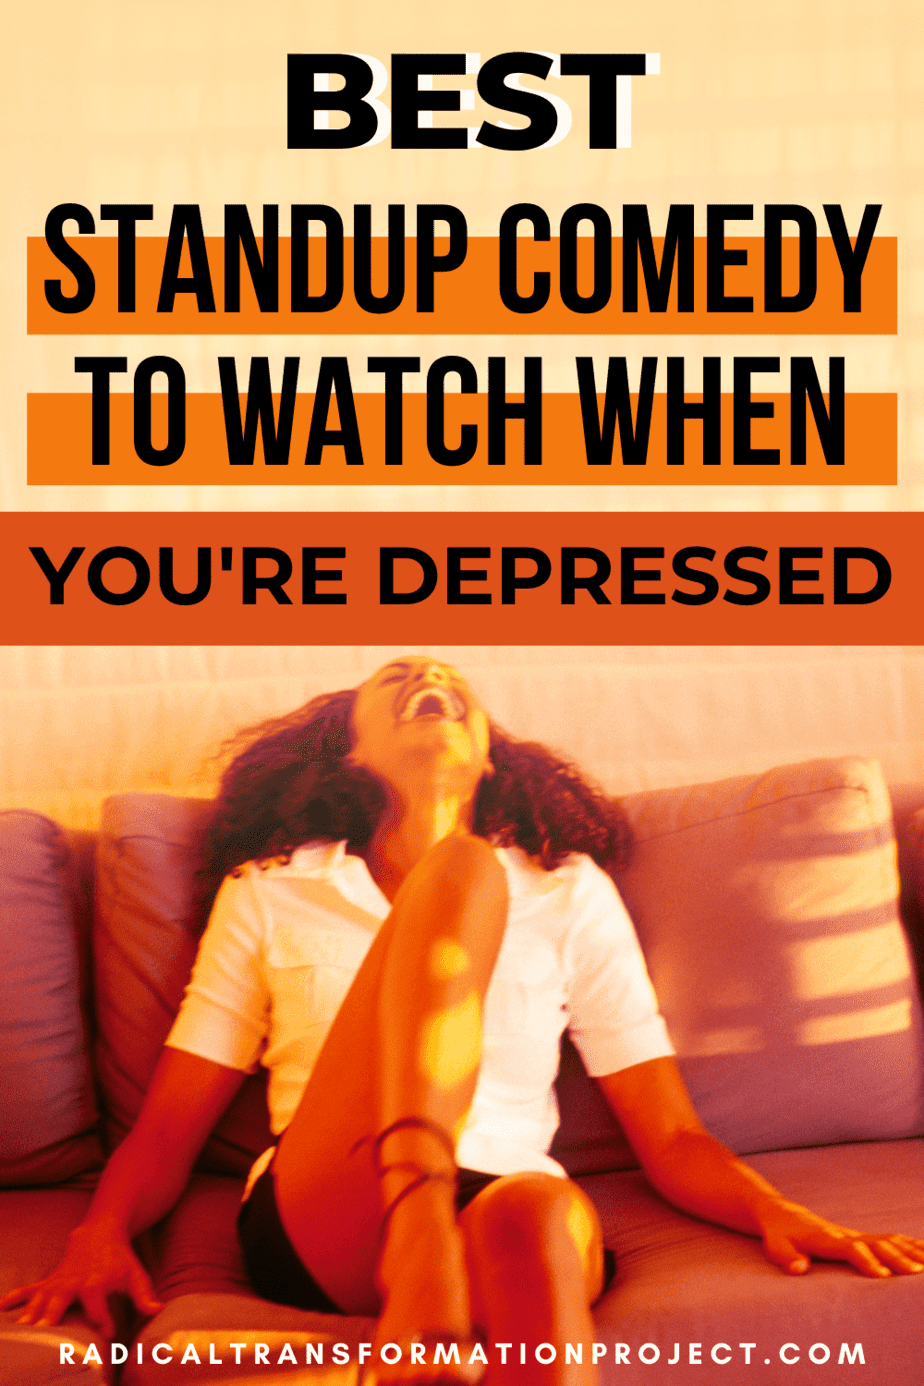 Standup Comedy to Watch When You're Depressed